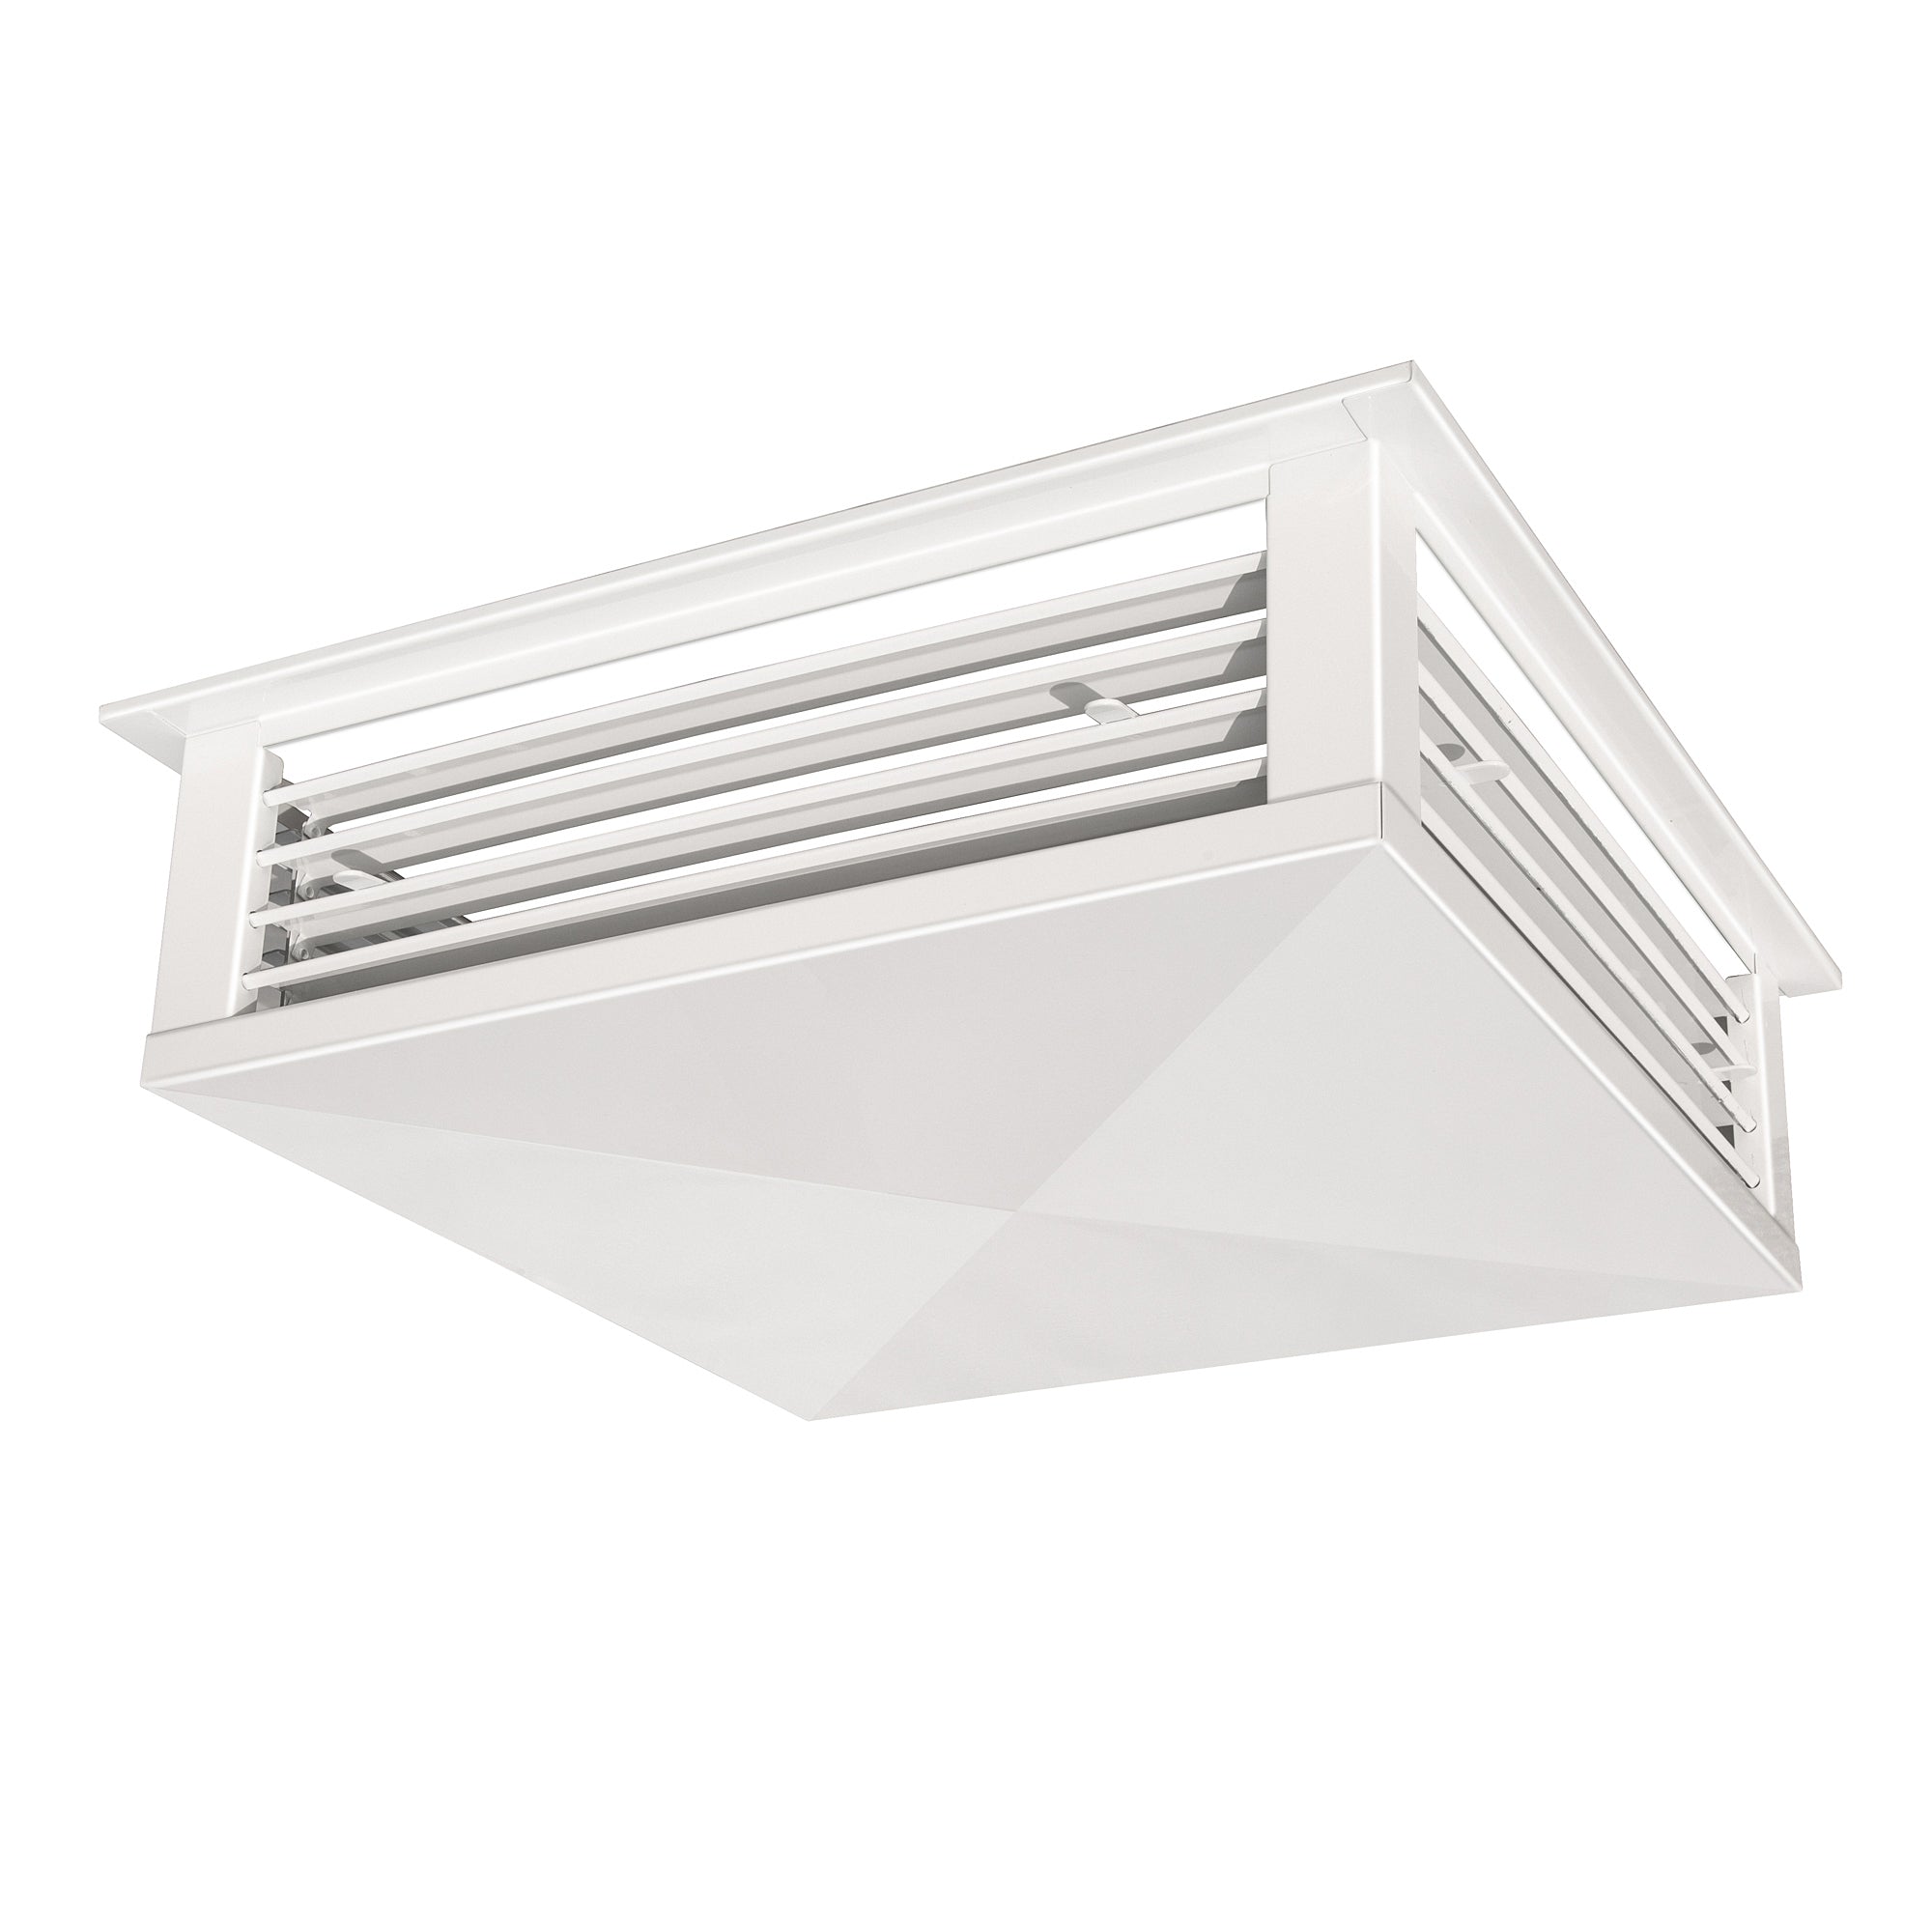 GSW 22" White Powder Coated 4-Way Adjustable Metal Diffuser for Evaporative/Swamp Cooler (22"x22"x6")